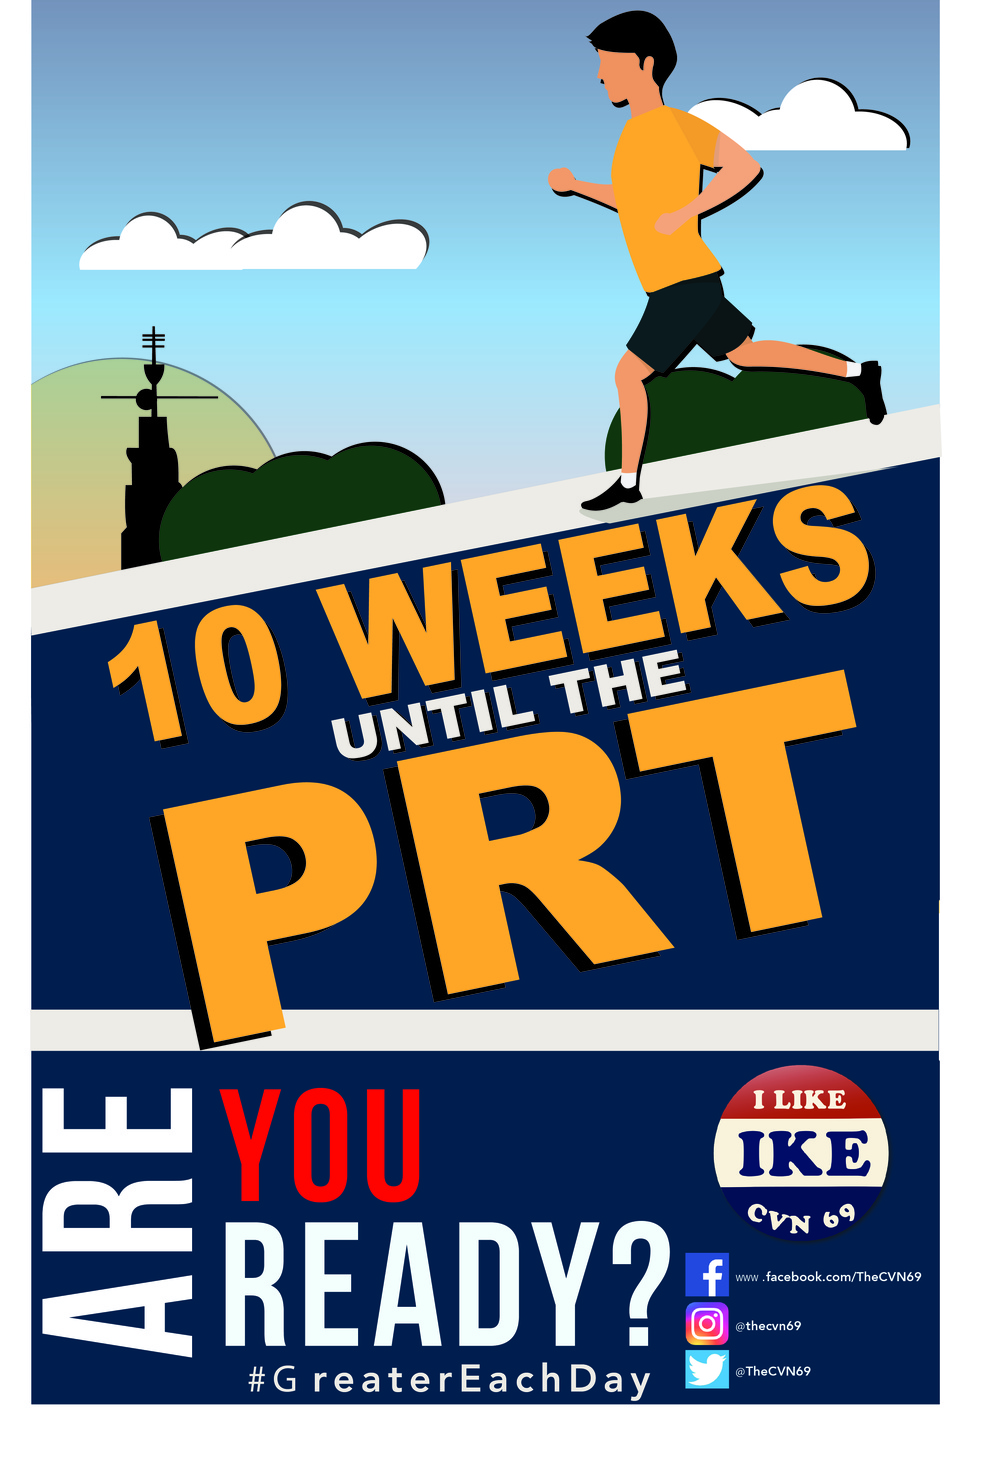 Are You Ready For The PRT?